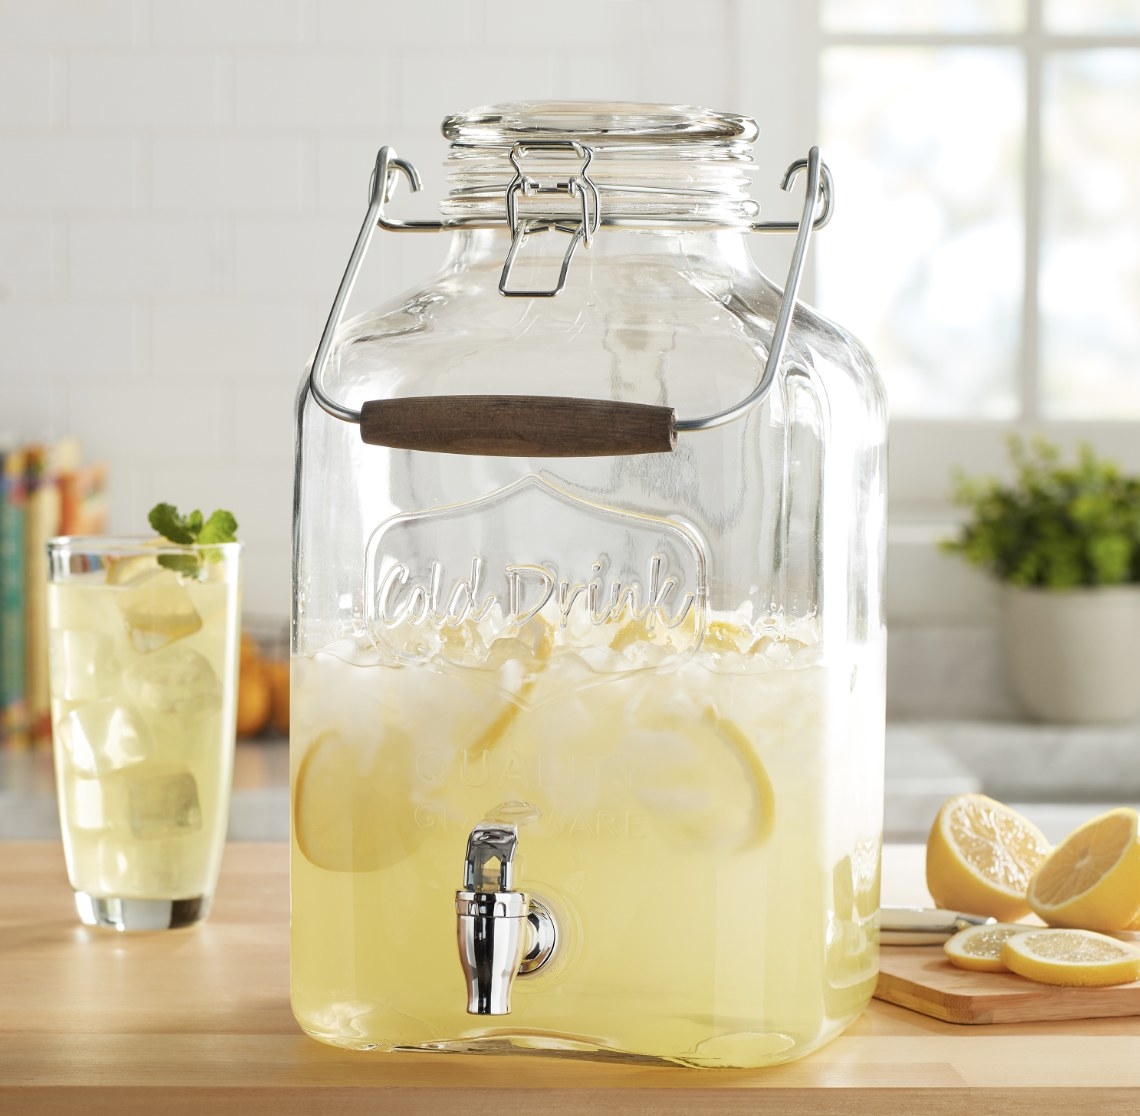 The glass container is filled halfway with lemonade, ice and lemon slices